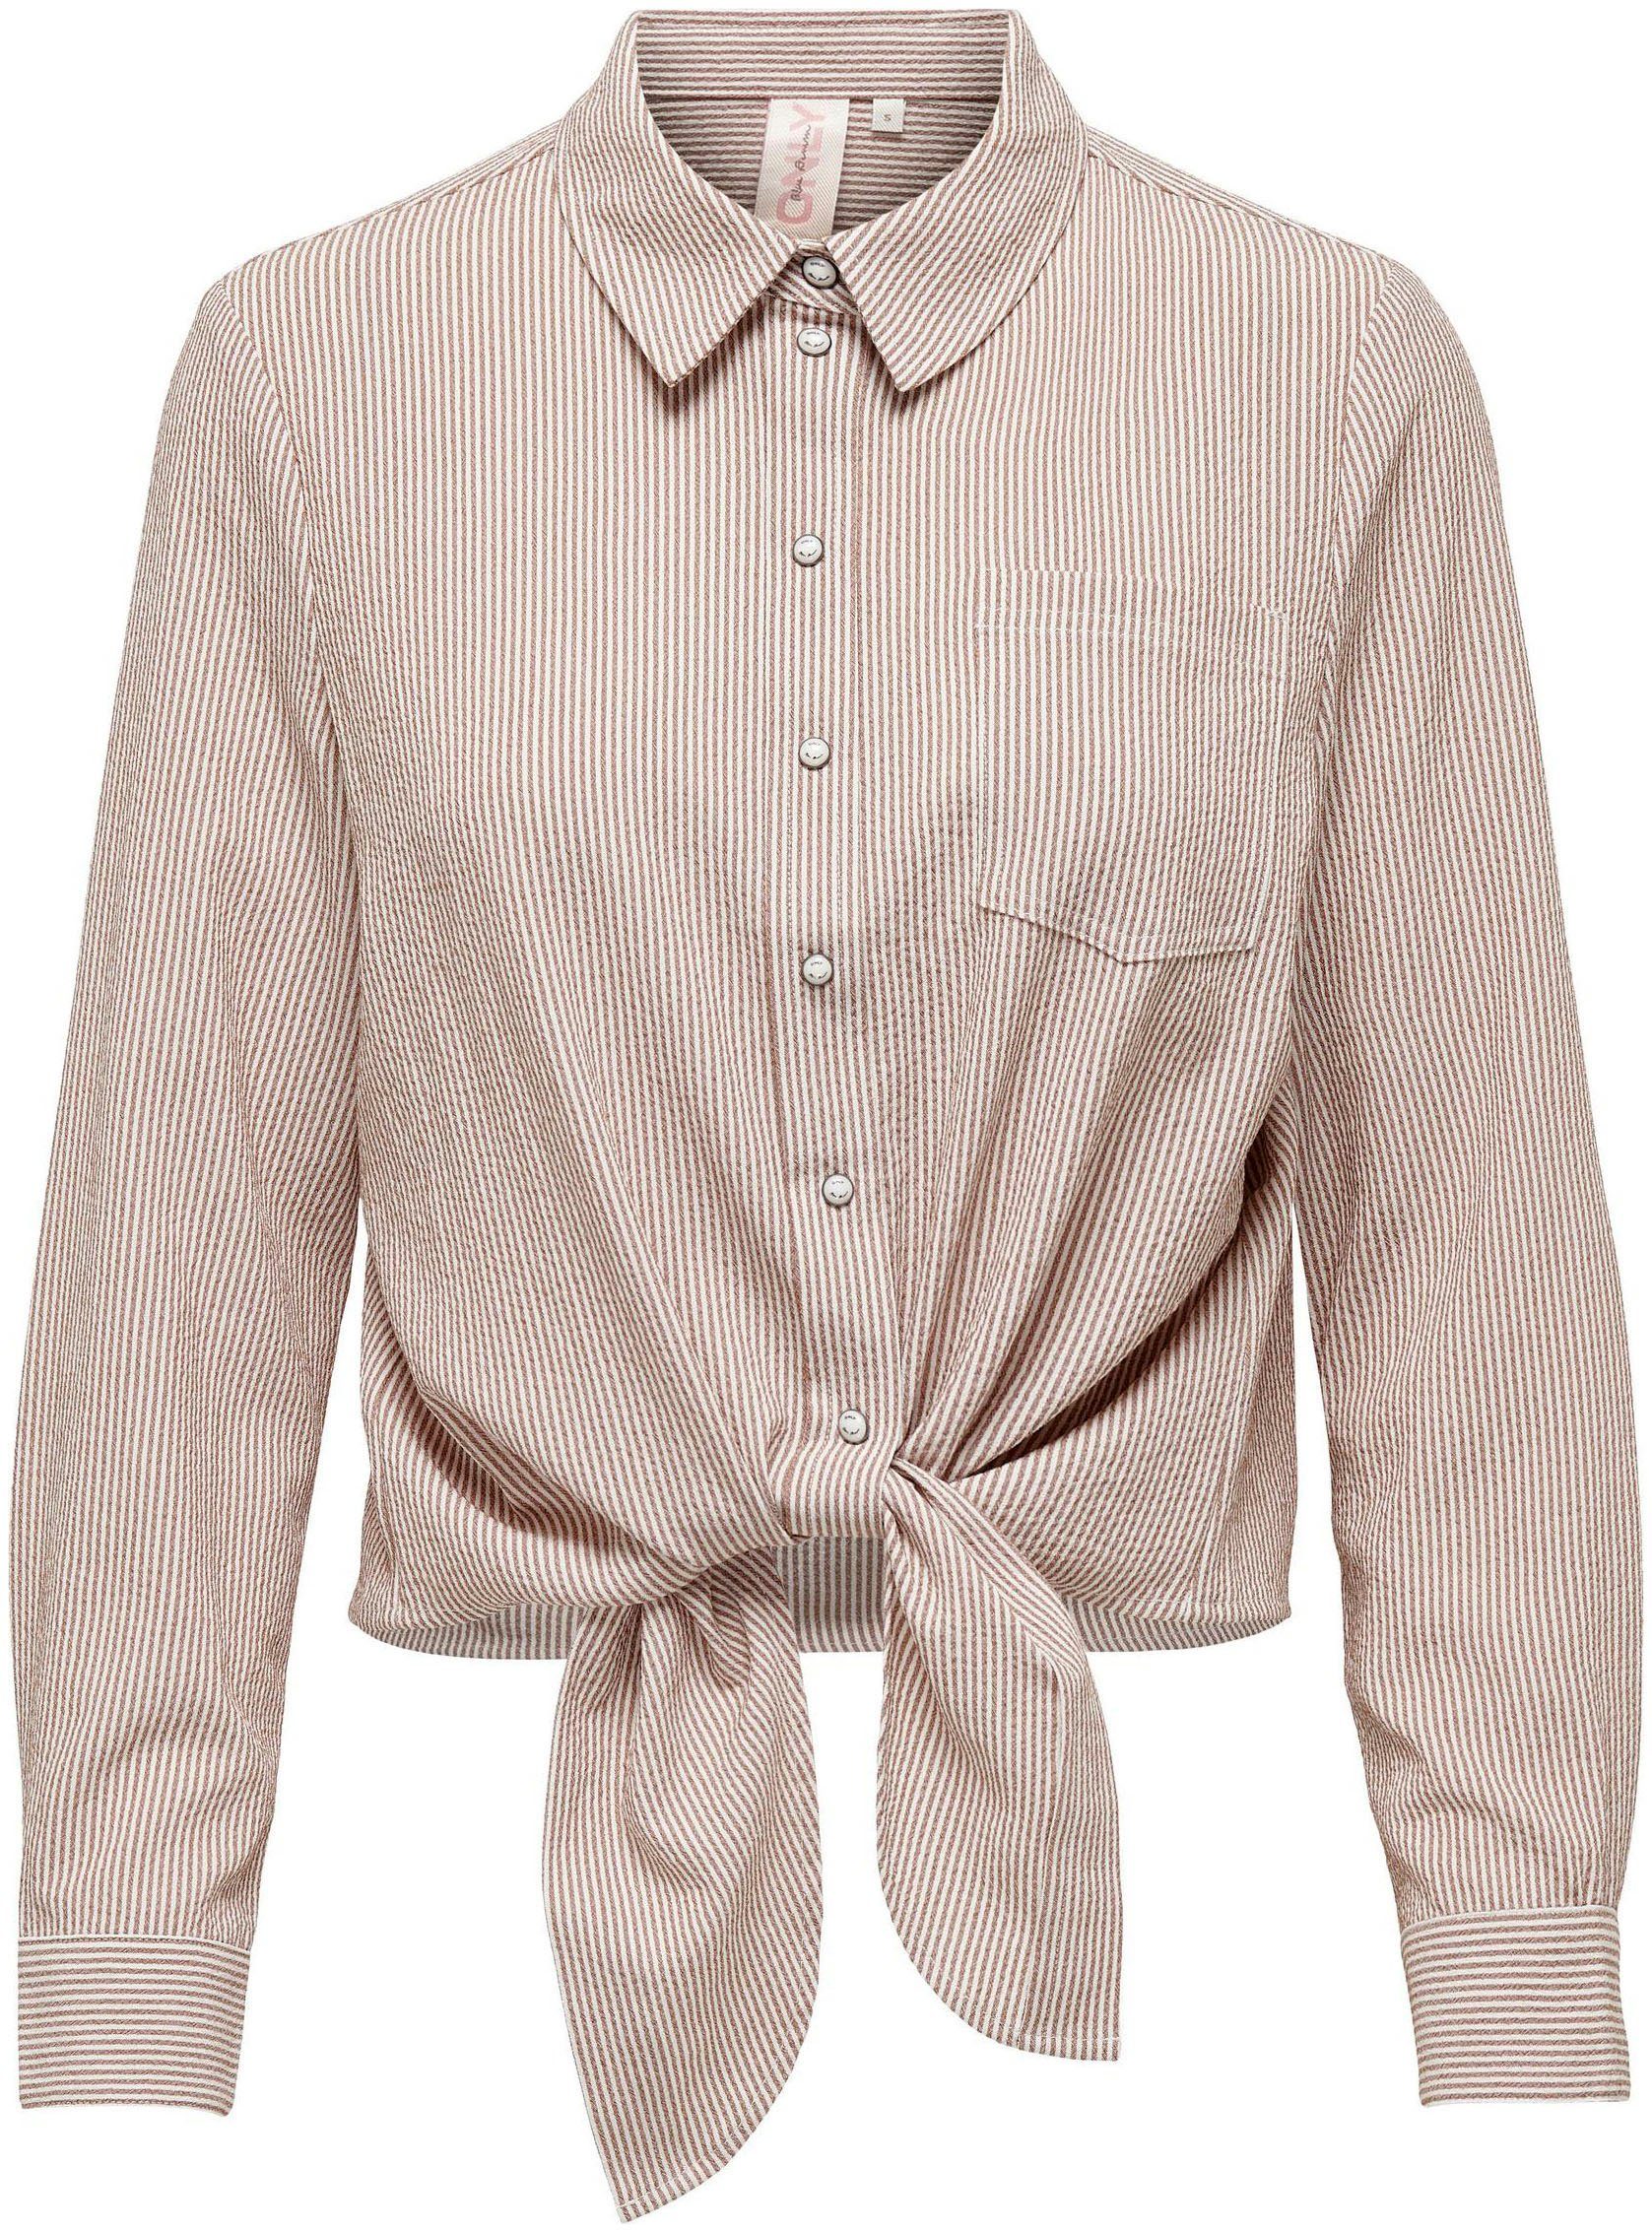 ONLY Hemdbluse KNOT LS Coconut WVN ONLLECEY Toasted SHIRT NOOS